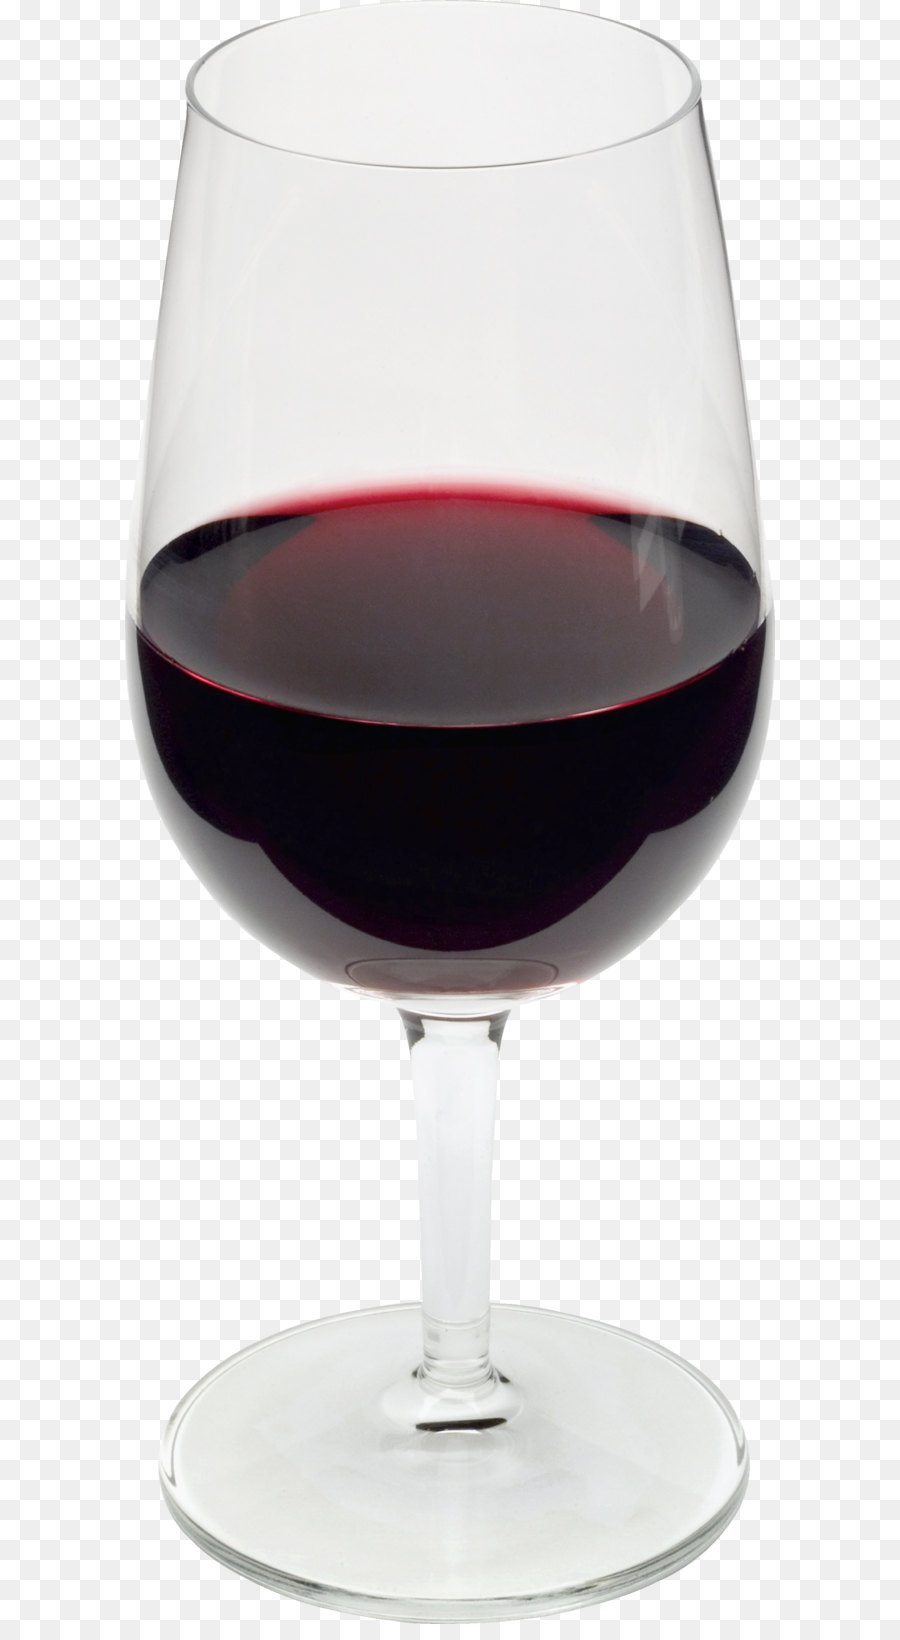 Red Wine Wine glass - Glass PNG image png download - 1403*3506 - Free Transparent Red Wine png Download.